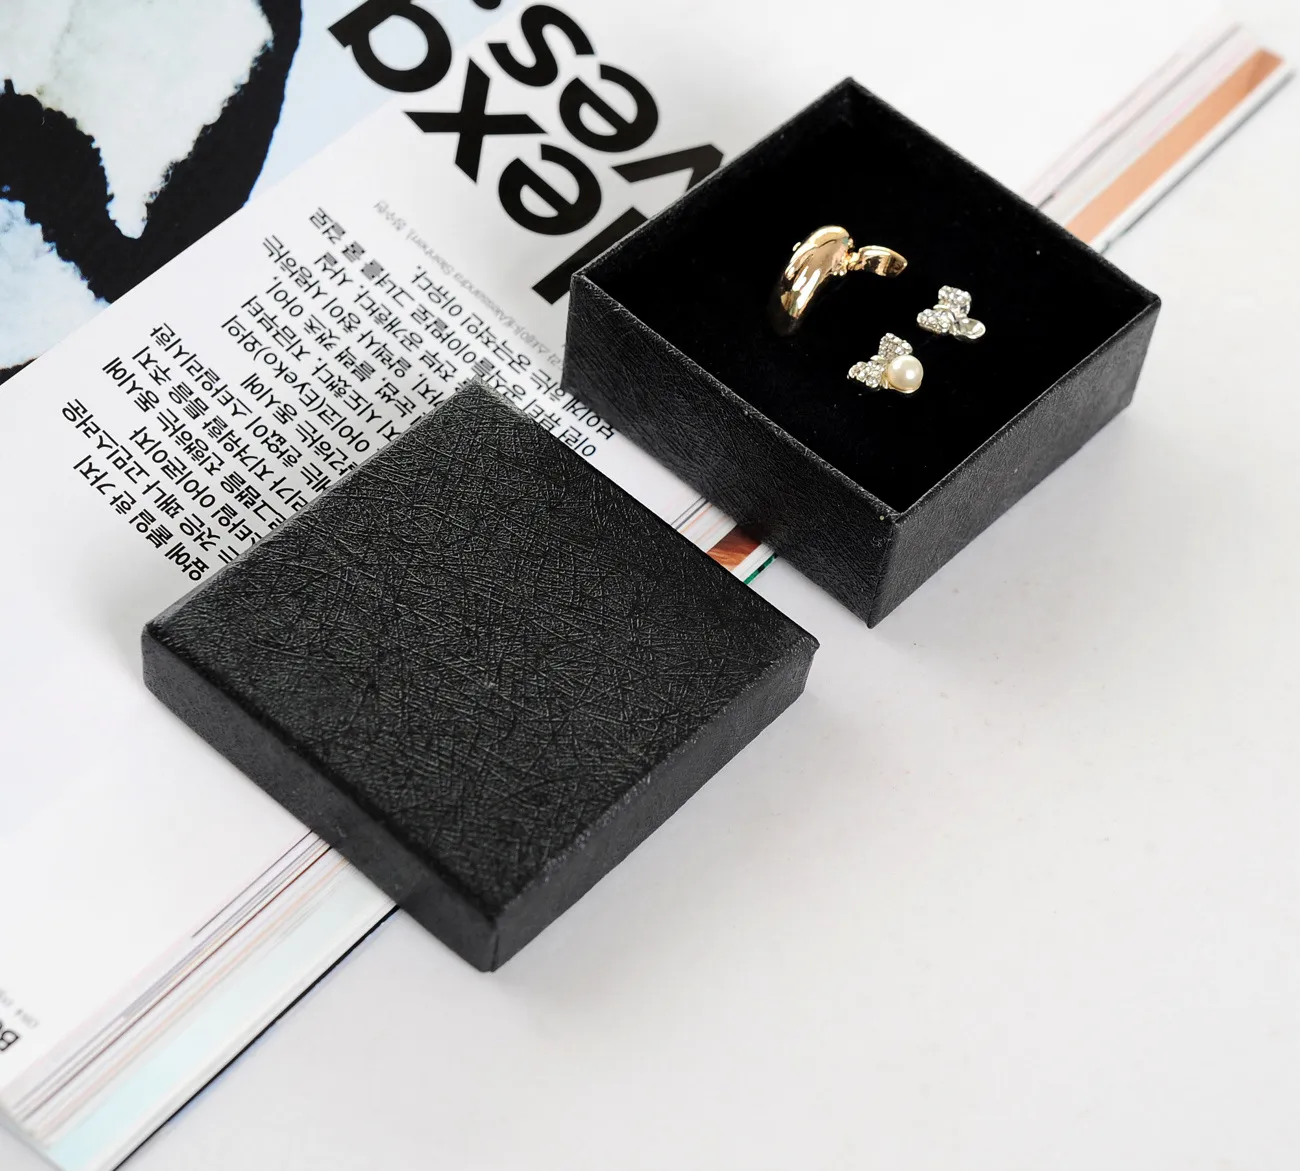 simple seven 6 36 32 3cm classic black jewelry ring box specialty paper bracelet carrying box festival pendant display with sponge307e